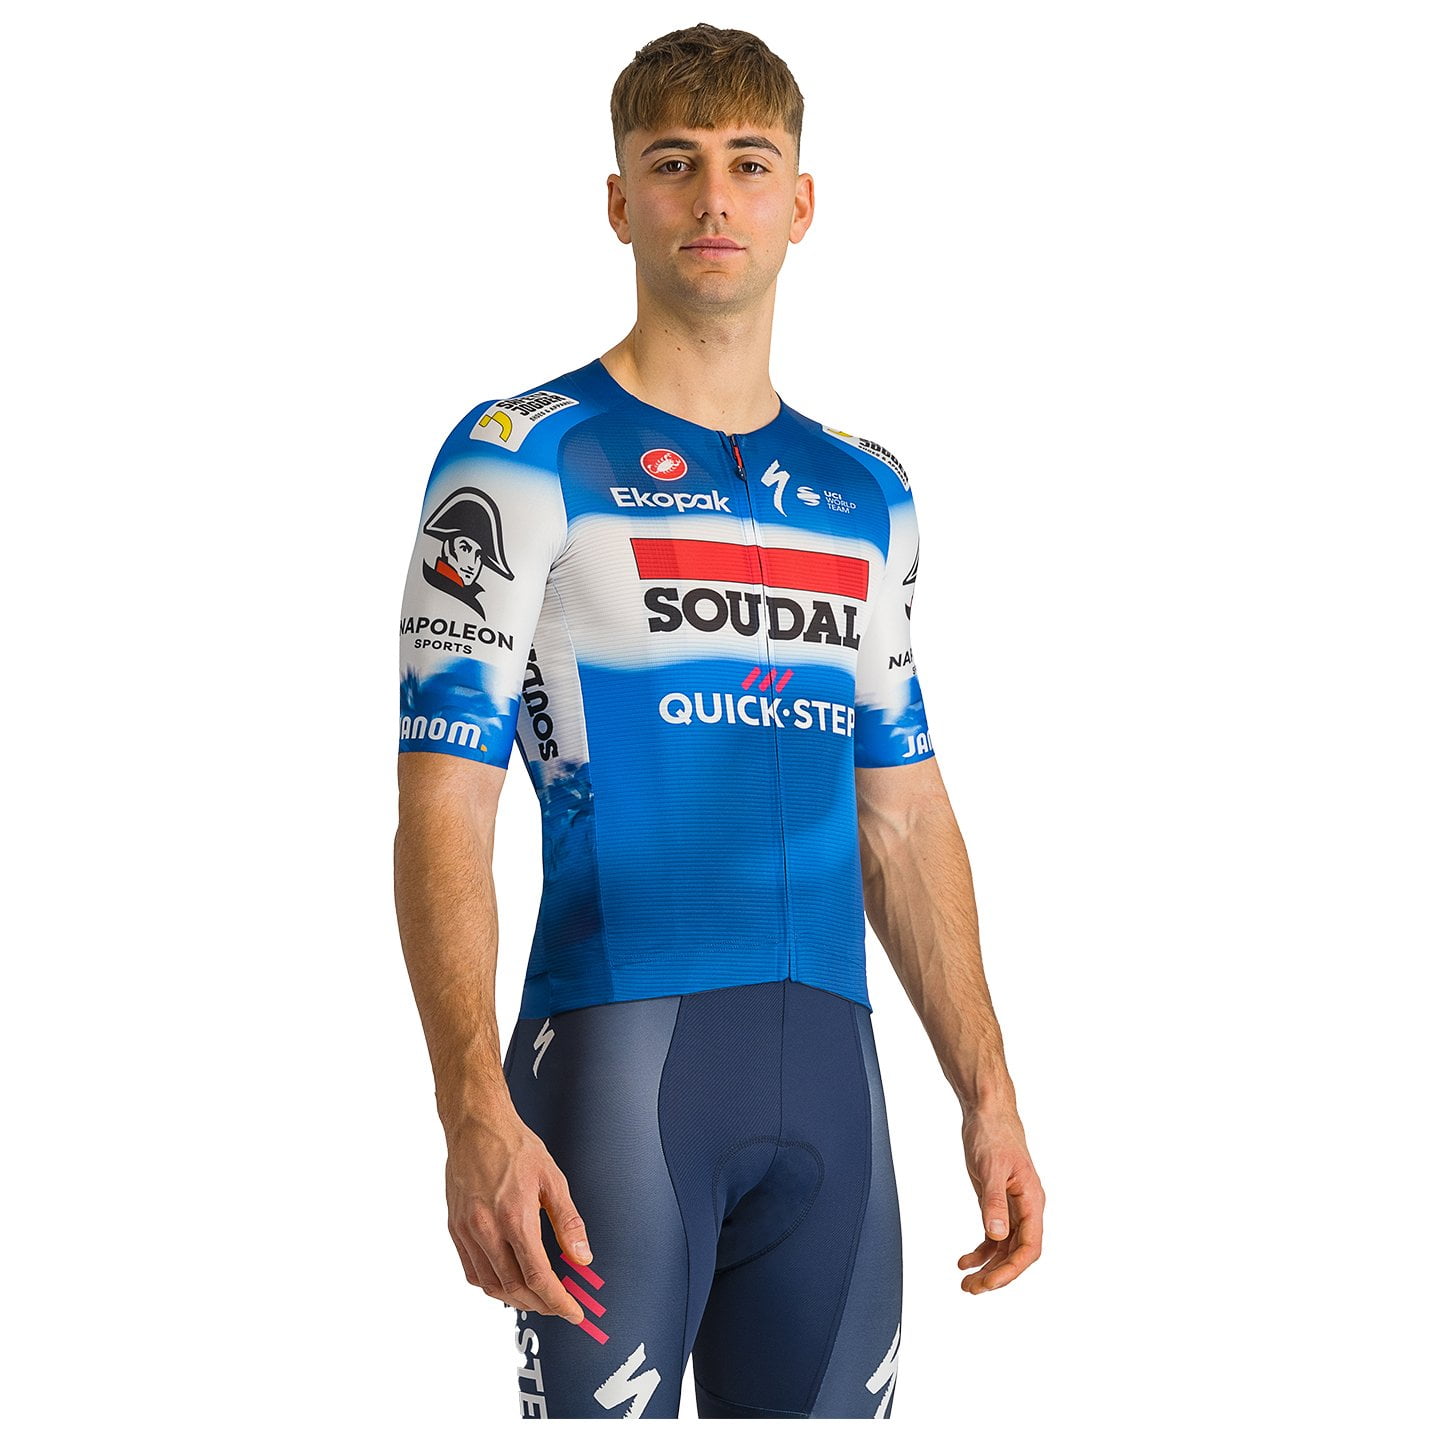 SOUDAL QUICK-STEP Race 2024 Short Sleeve Jersey, for men, size M, Cycle jersey, Cycling clothing